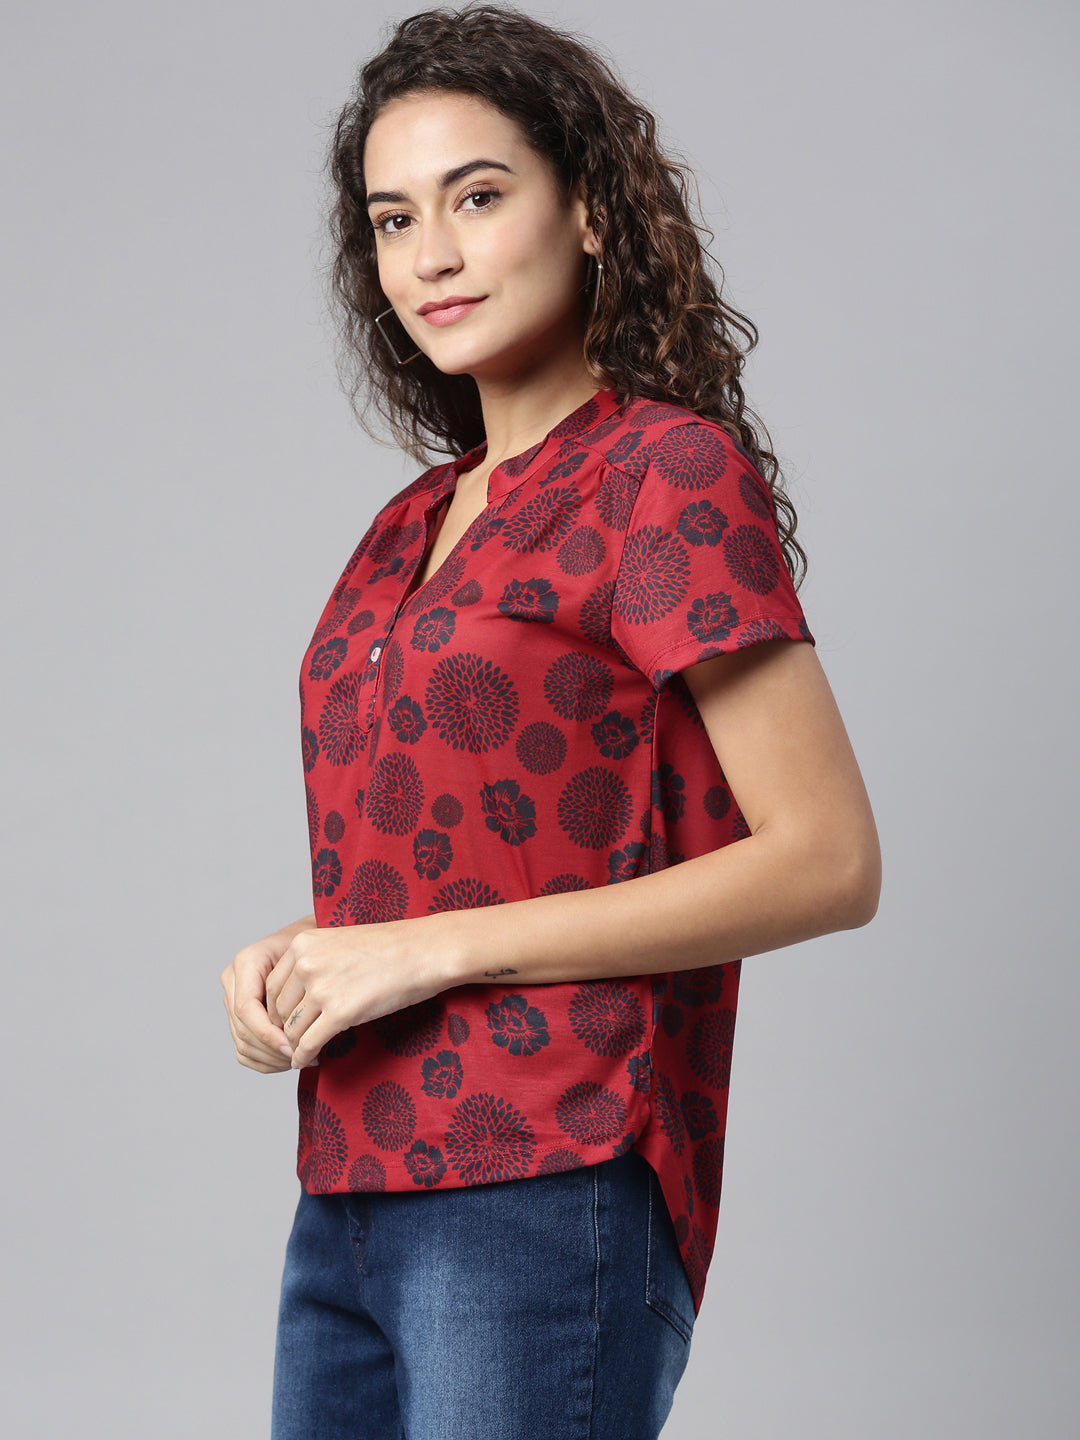 ERIKA03 (100% POLYESTER PRINT CASUAL TOP FOR WOMENS)